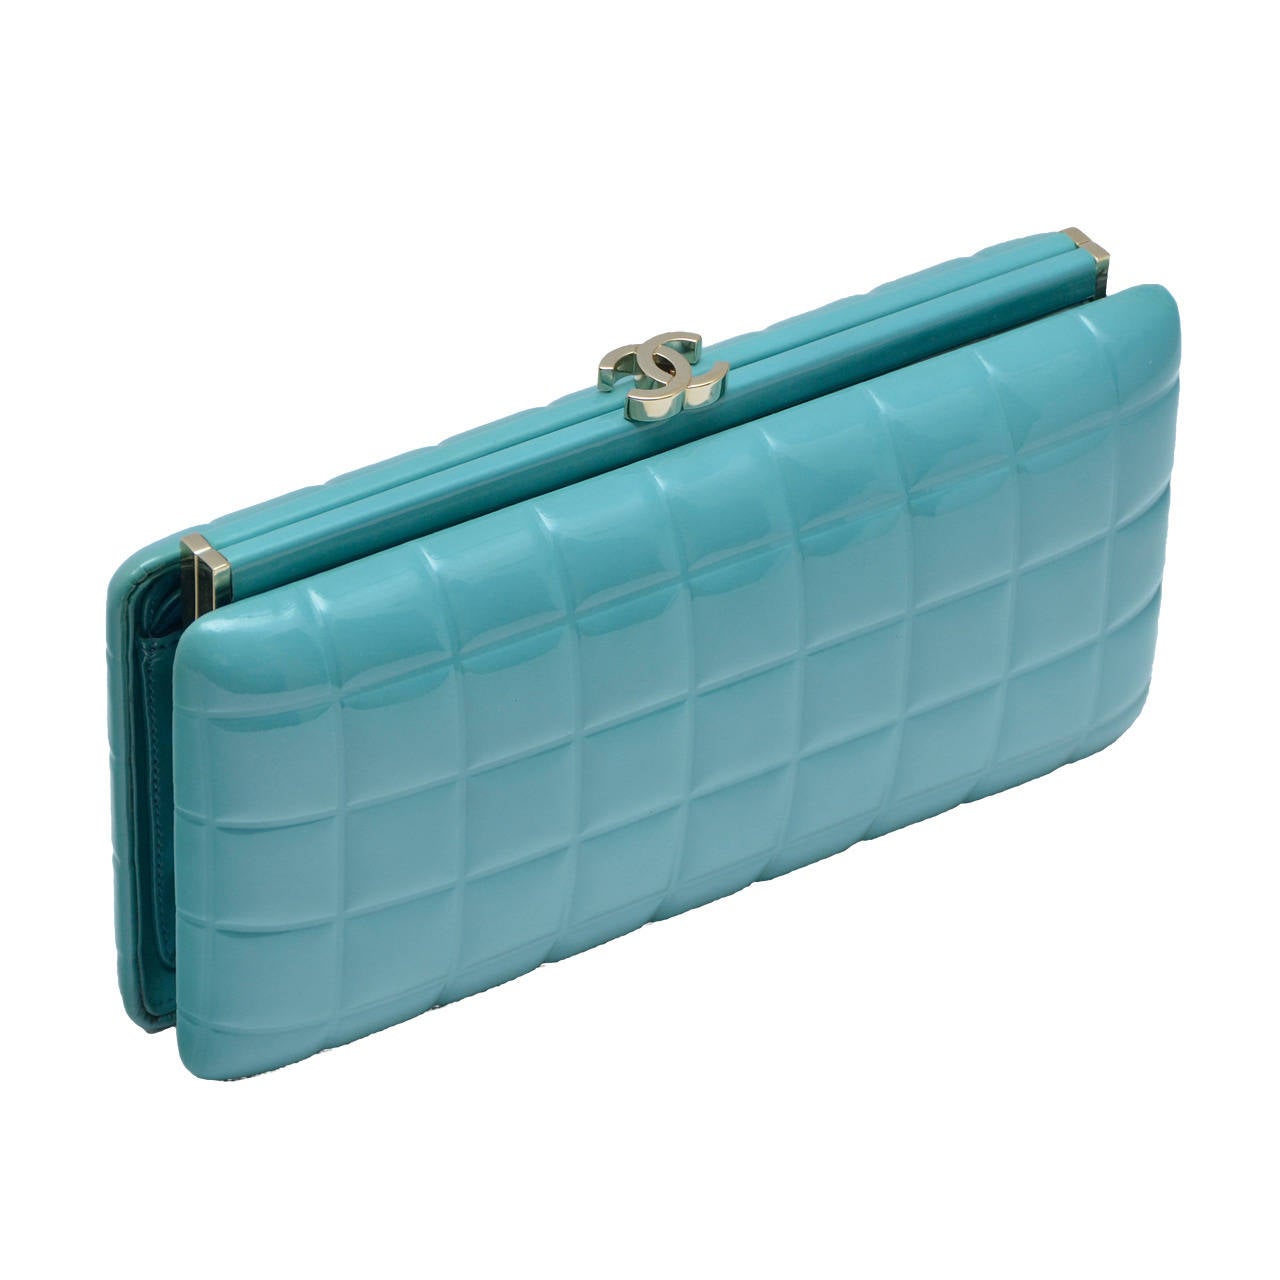 CHANEL Patent  Clutch Handbag Turquoise Color New